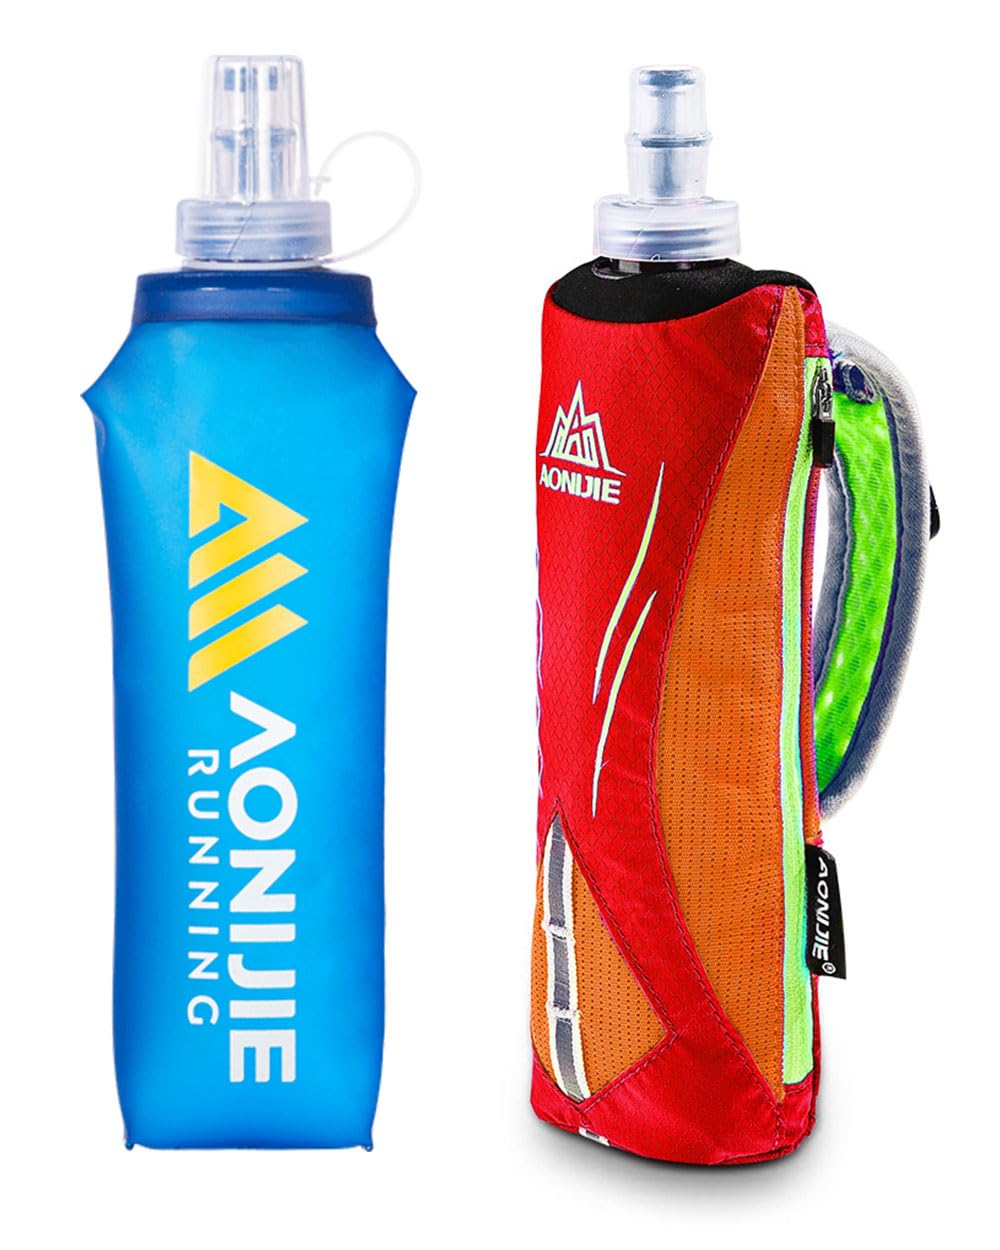 AONIJIE Running Water Bottle Hand Held for Runners, Fit 6.5 Inches Phone, Collapsible 17oz/ 500ml Soft Flask, Adjustable Strap Handheld for Walking, Hiking